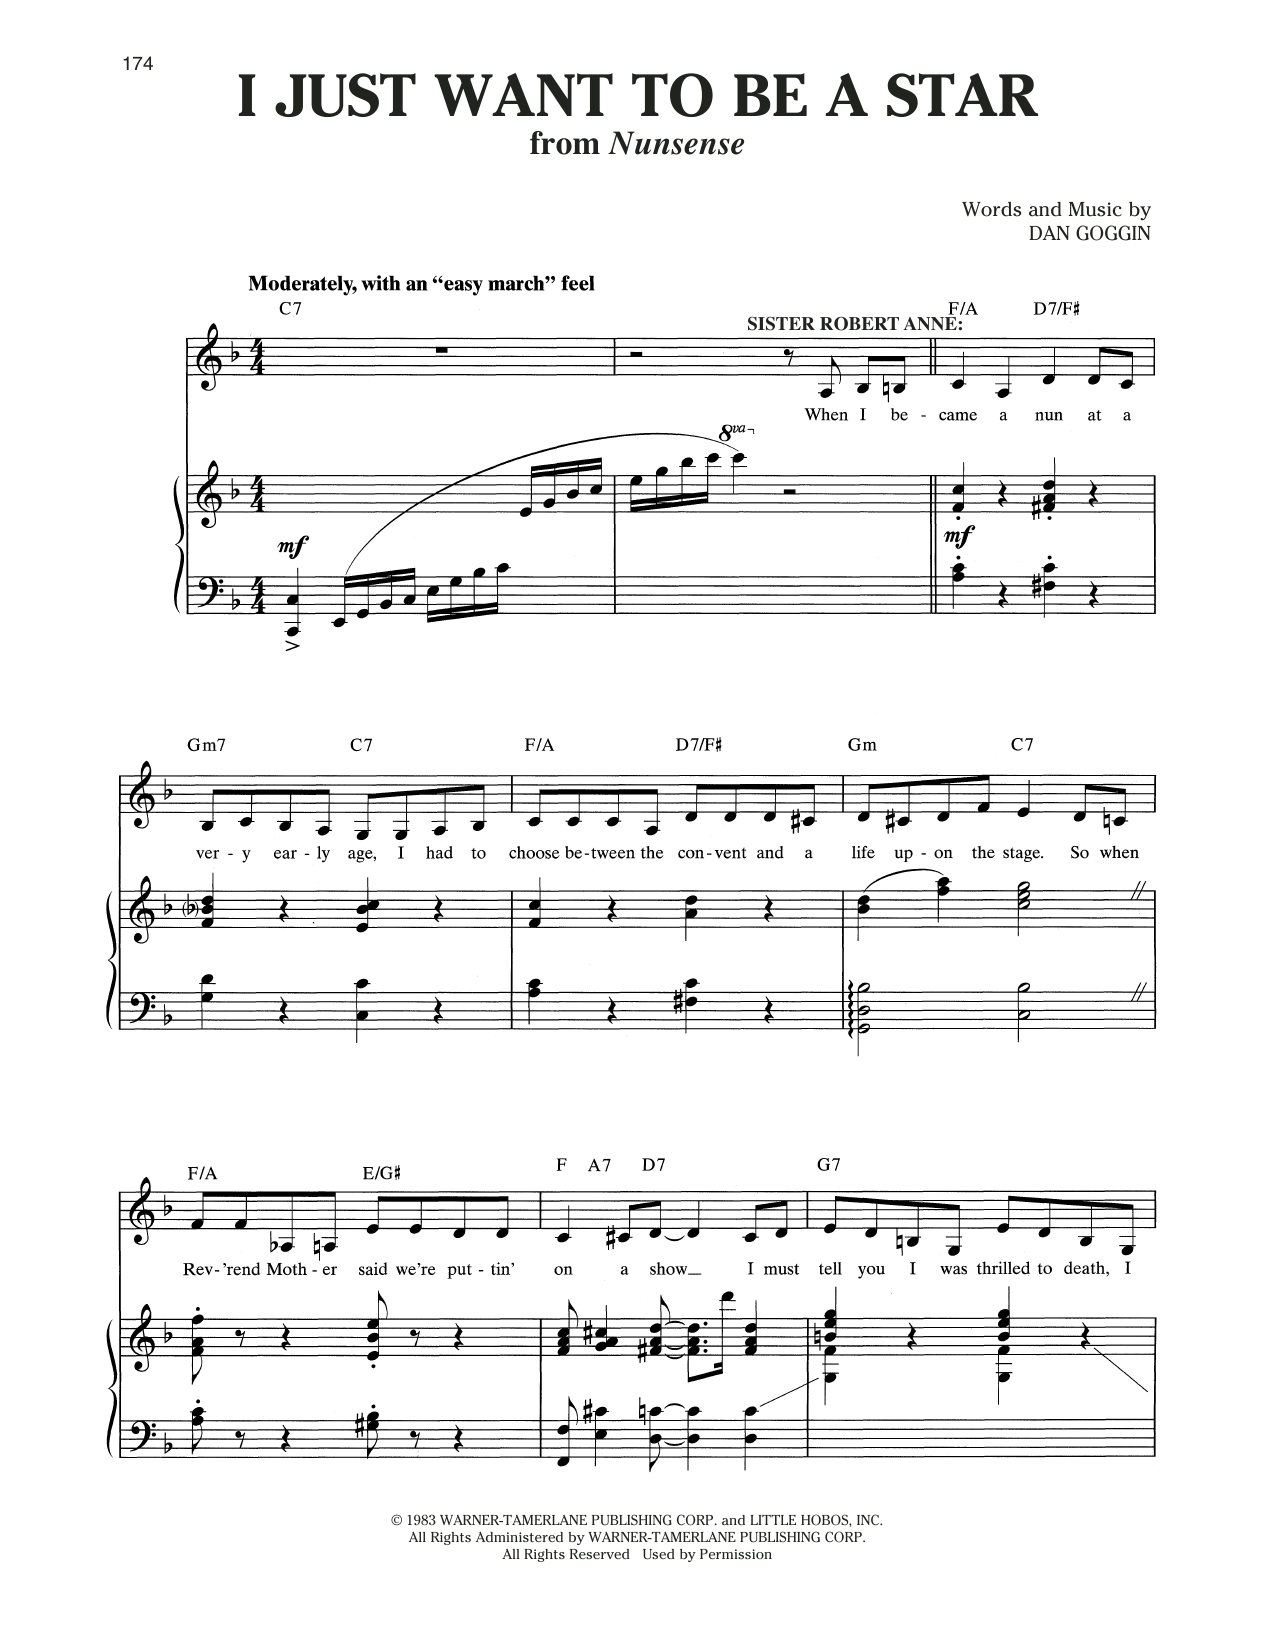 Download Dan Goggin I Just Want To Be A Star (from Nunsense Sheet Music